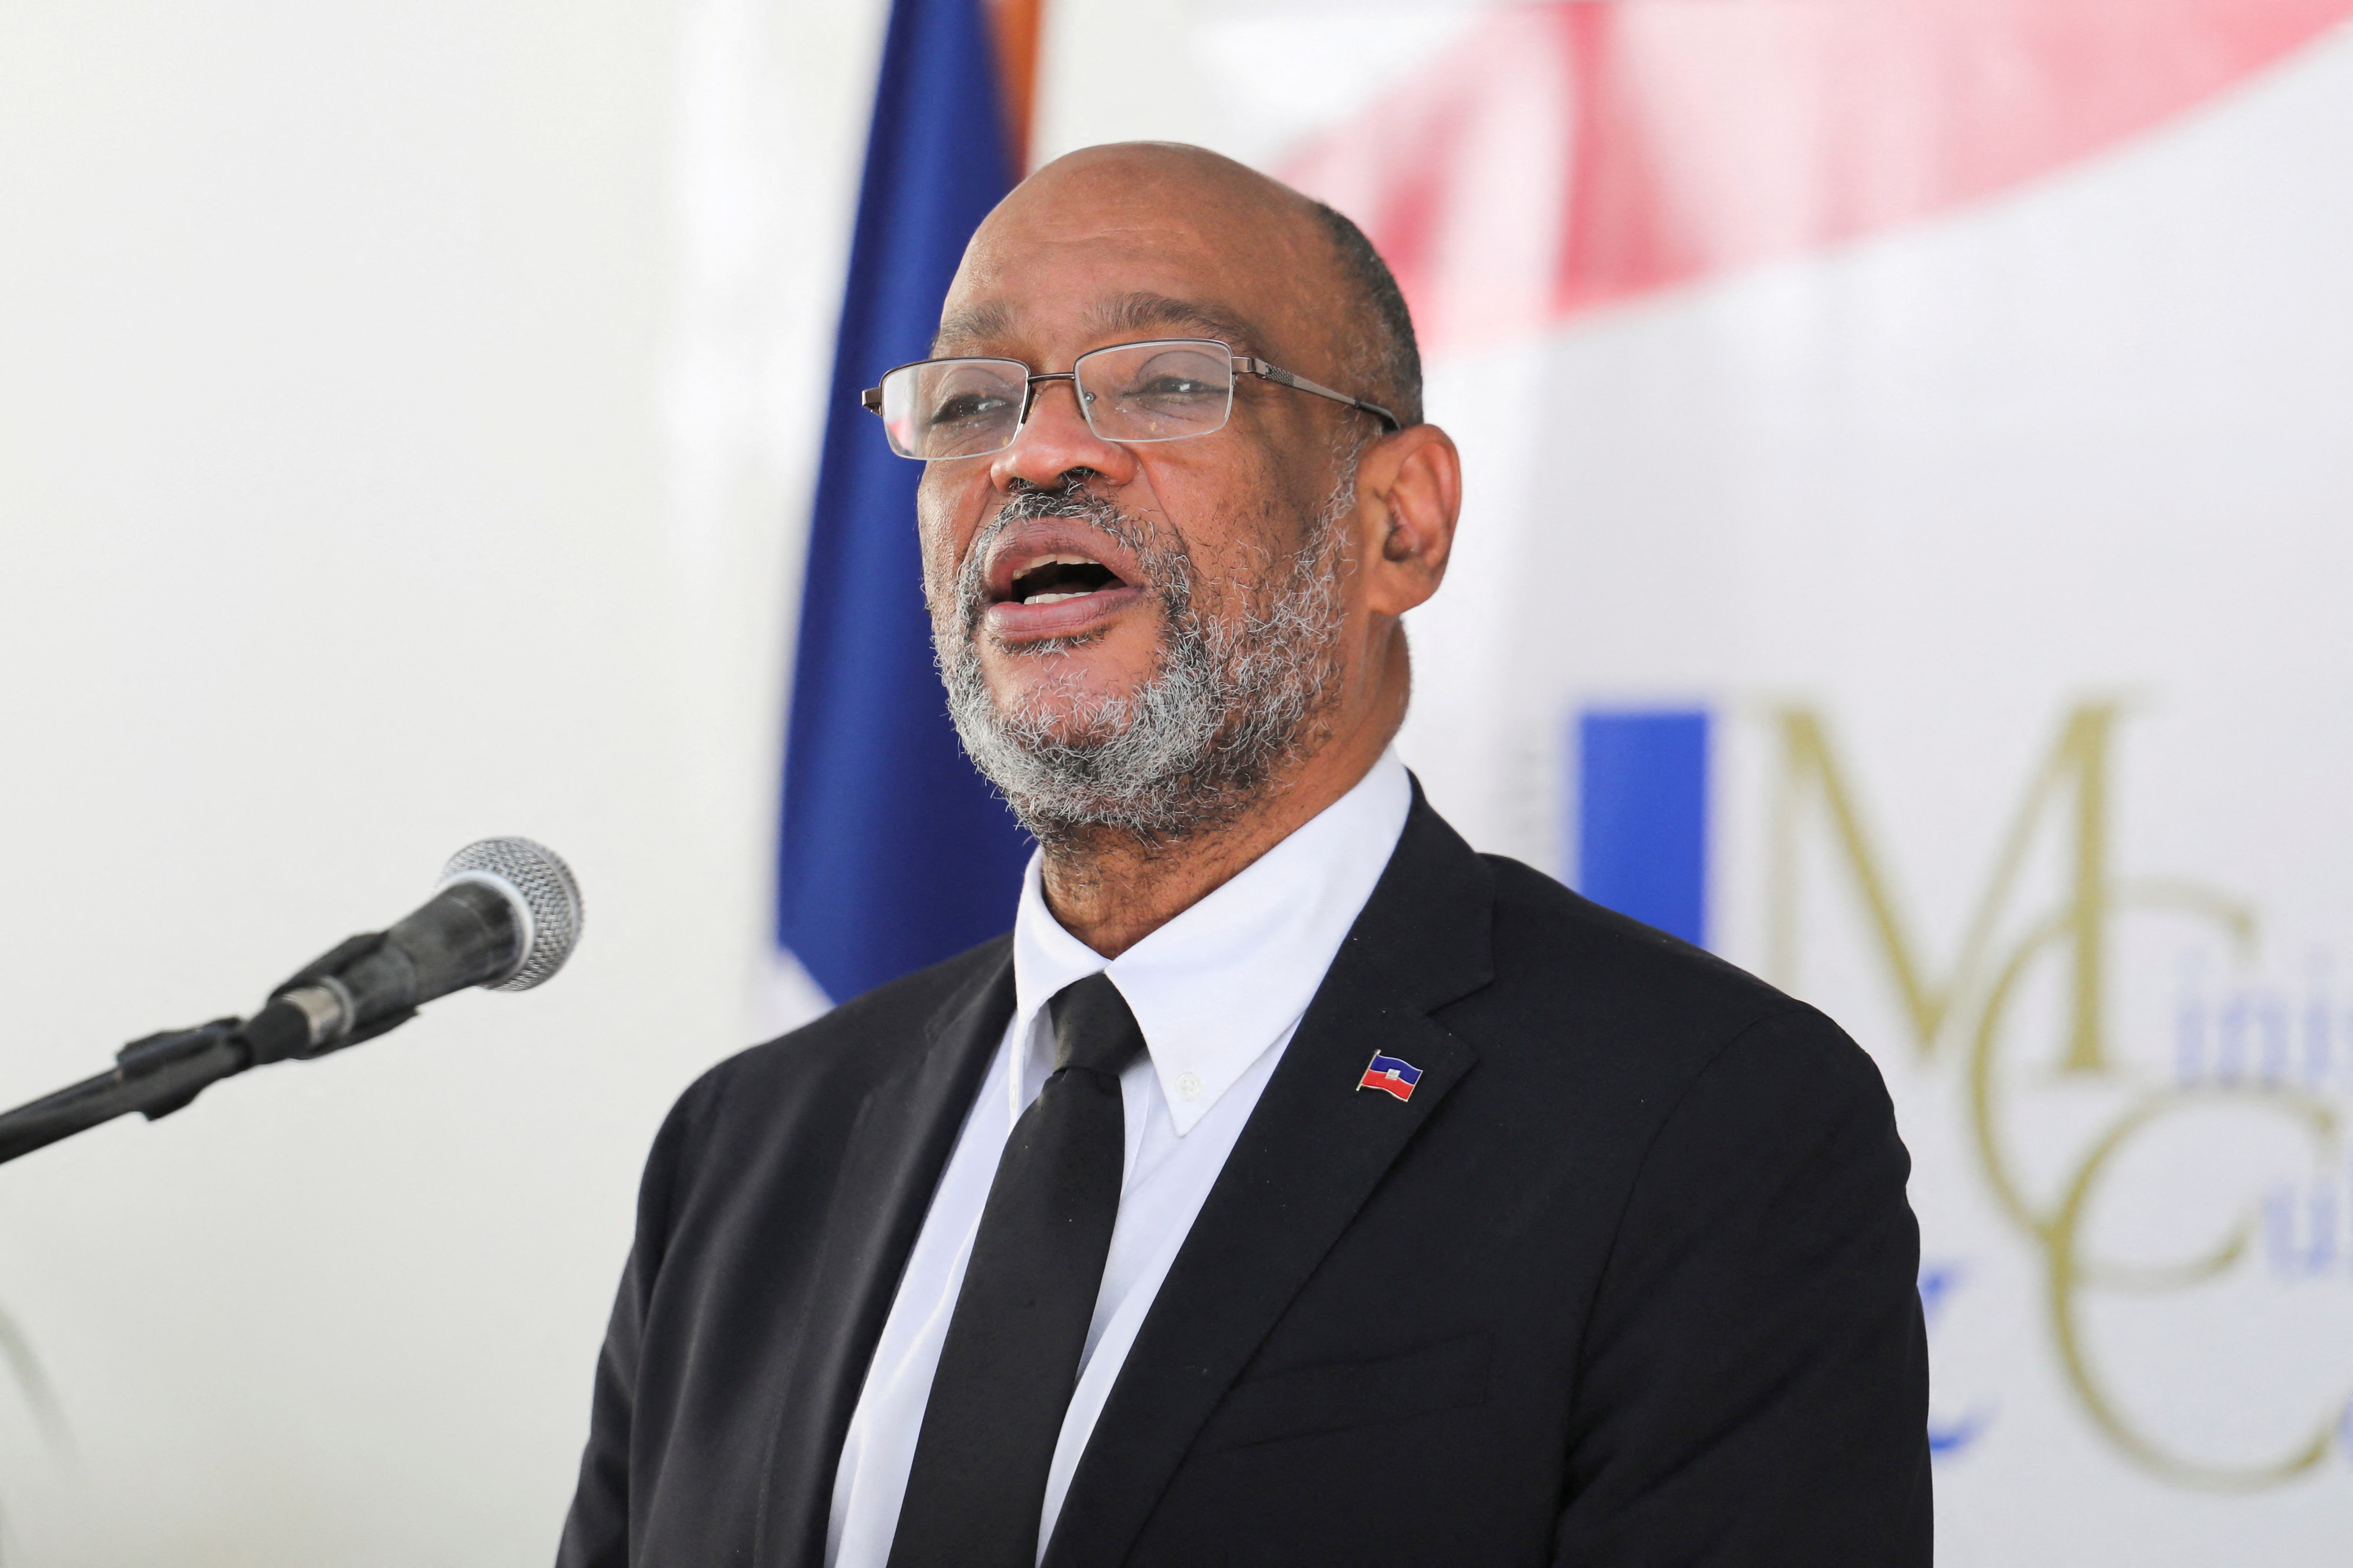 Haitian Prime Minister Ariel Henry inaugurated as Minister of Culture and Communication, in Port-au-Prince